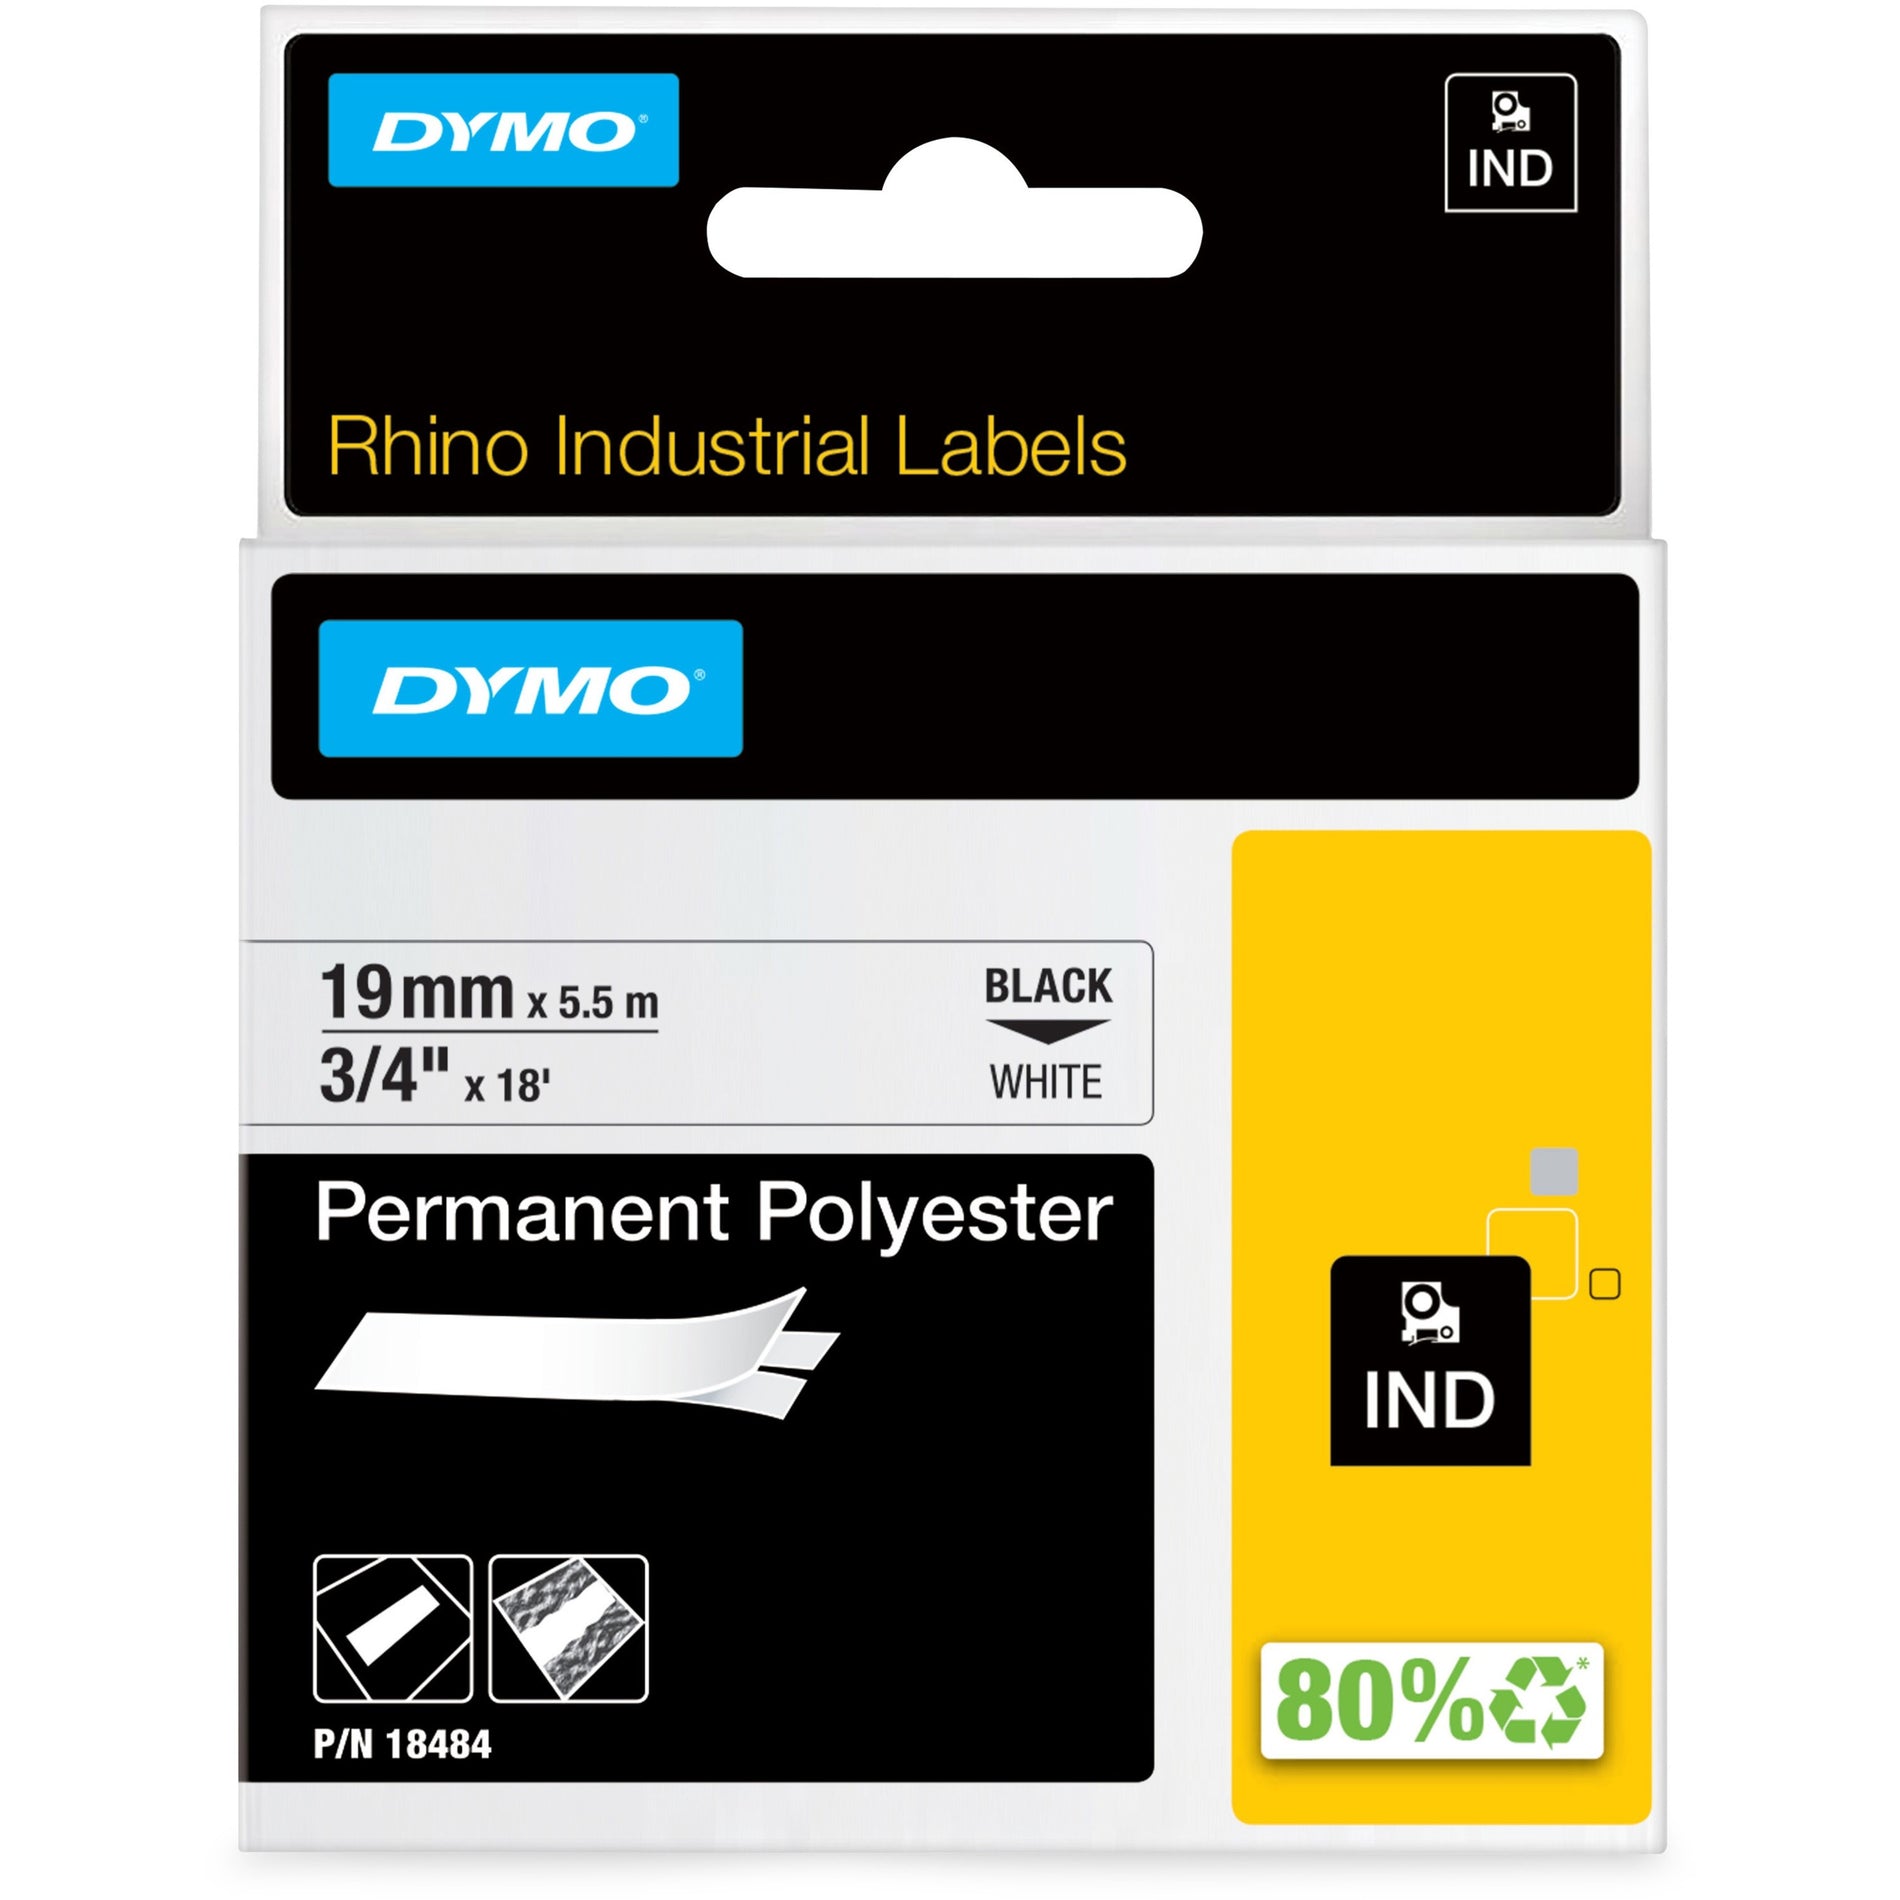 Dymo 18484 Permanent Polyester Labels, 3/4"x18', White, Outdoor Use